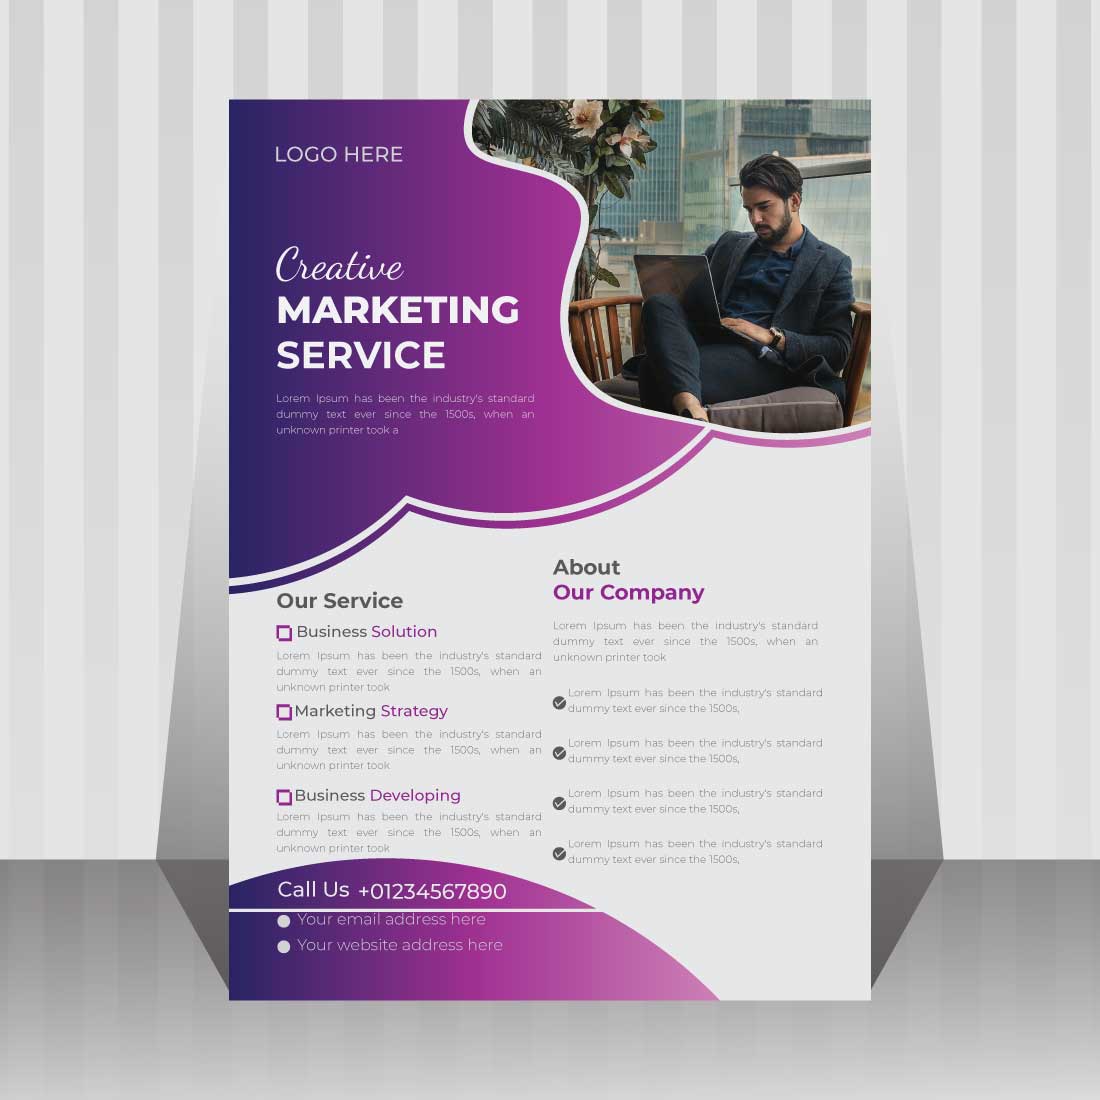 Digital Marketing Agency and Corporate Business Flyer Template Design main cover.